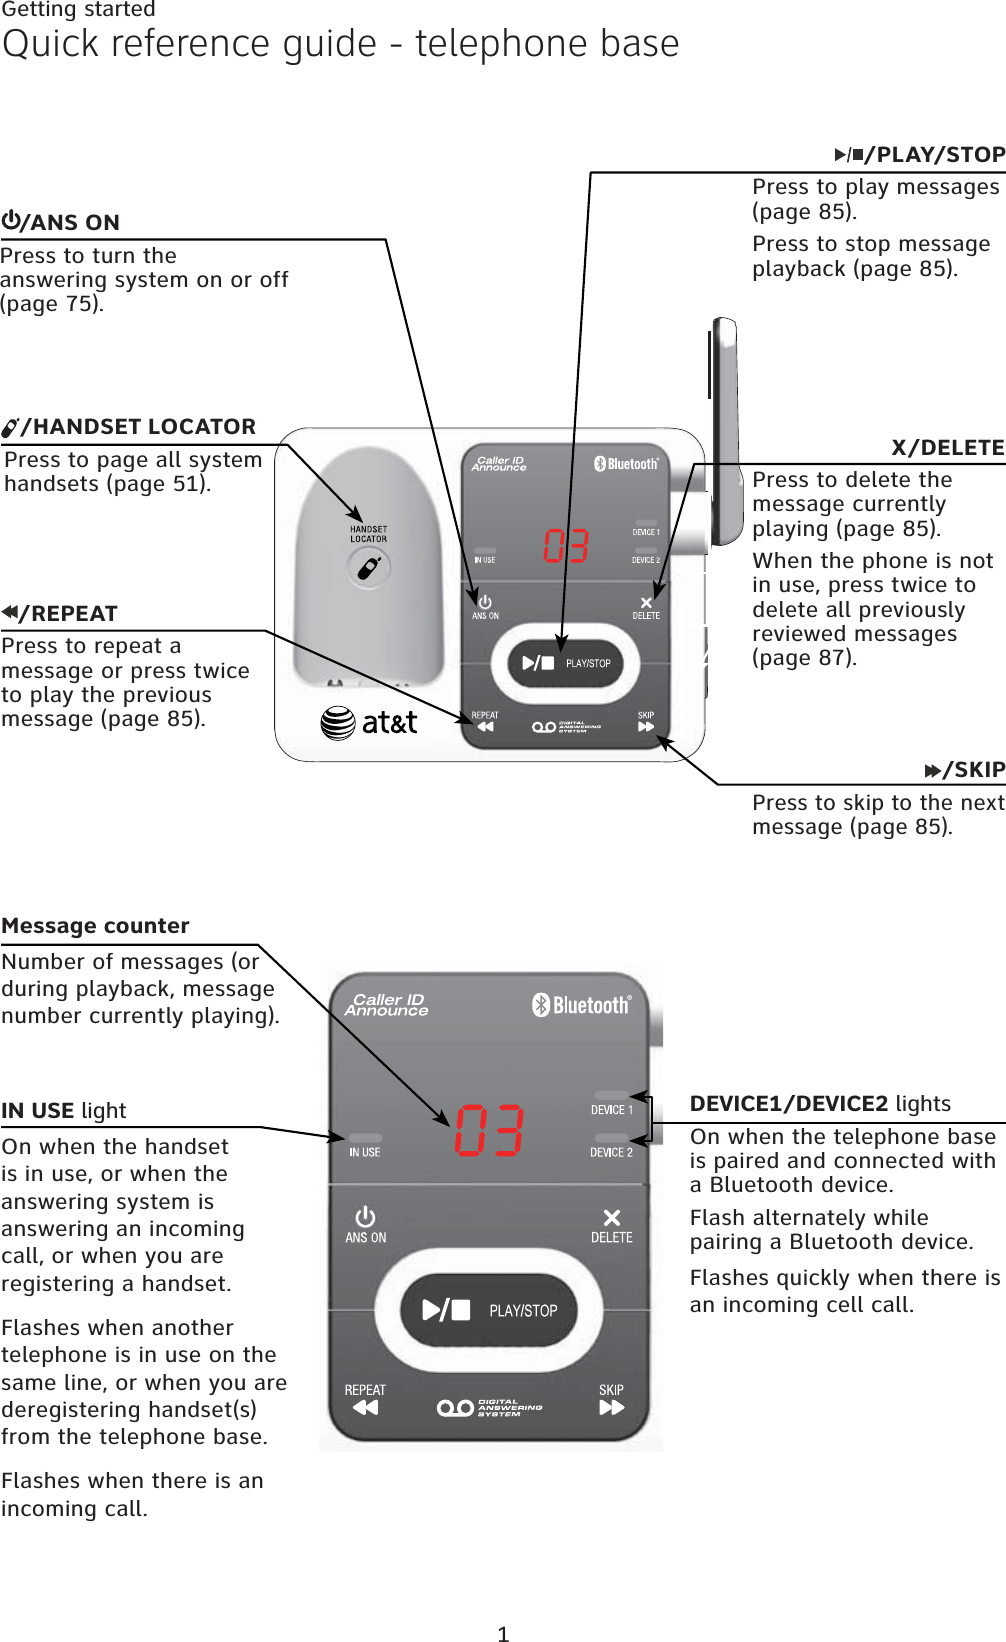 1Quick reference guide - telephone baseMessage counterNumber of messages (or during playback, message number currently playing).IN USE lightOn when the handset is in use, or when the answering system is answering an incoming call, or when you are registering a handset.Flashes when another telephone is in use on the same line, or when you are deregistering handset(s) from the telephone base.Flashes when there is an incoming call.DEVICE1/DEVICE2 lightsOn when the telephone base is paired and connected with a Bluetooth device.Flash alternately while pairing a Bluetooth device.Flashes quickly when there is an incoming cell call.X/DELETEPress to delete the message currently playing (page 85).When the phone is not in use, press twice to delete all previously reviewed messages (page 87)./REPEATPress to repeat a message or press twice to play the previous message (page 85)./ANS ONPress to turn the answering system on or off (page 75)./SKIPPress to skip to the next message (page 85)./HANDSET LOCATORPress to page all system handsets (page 51)./PLAY/STOPPress to play messages (page 85).Press to stop message playback (page 85).Getting started